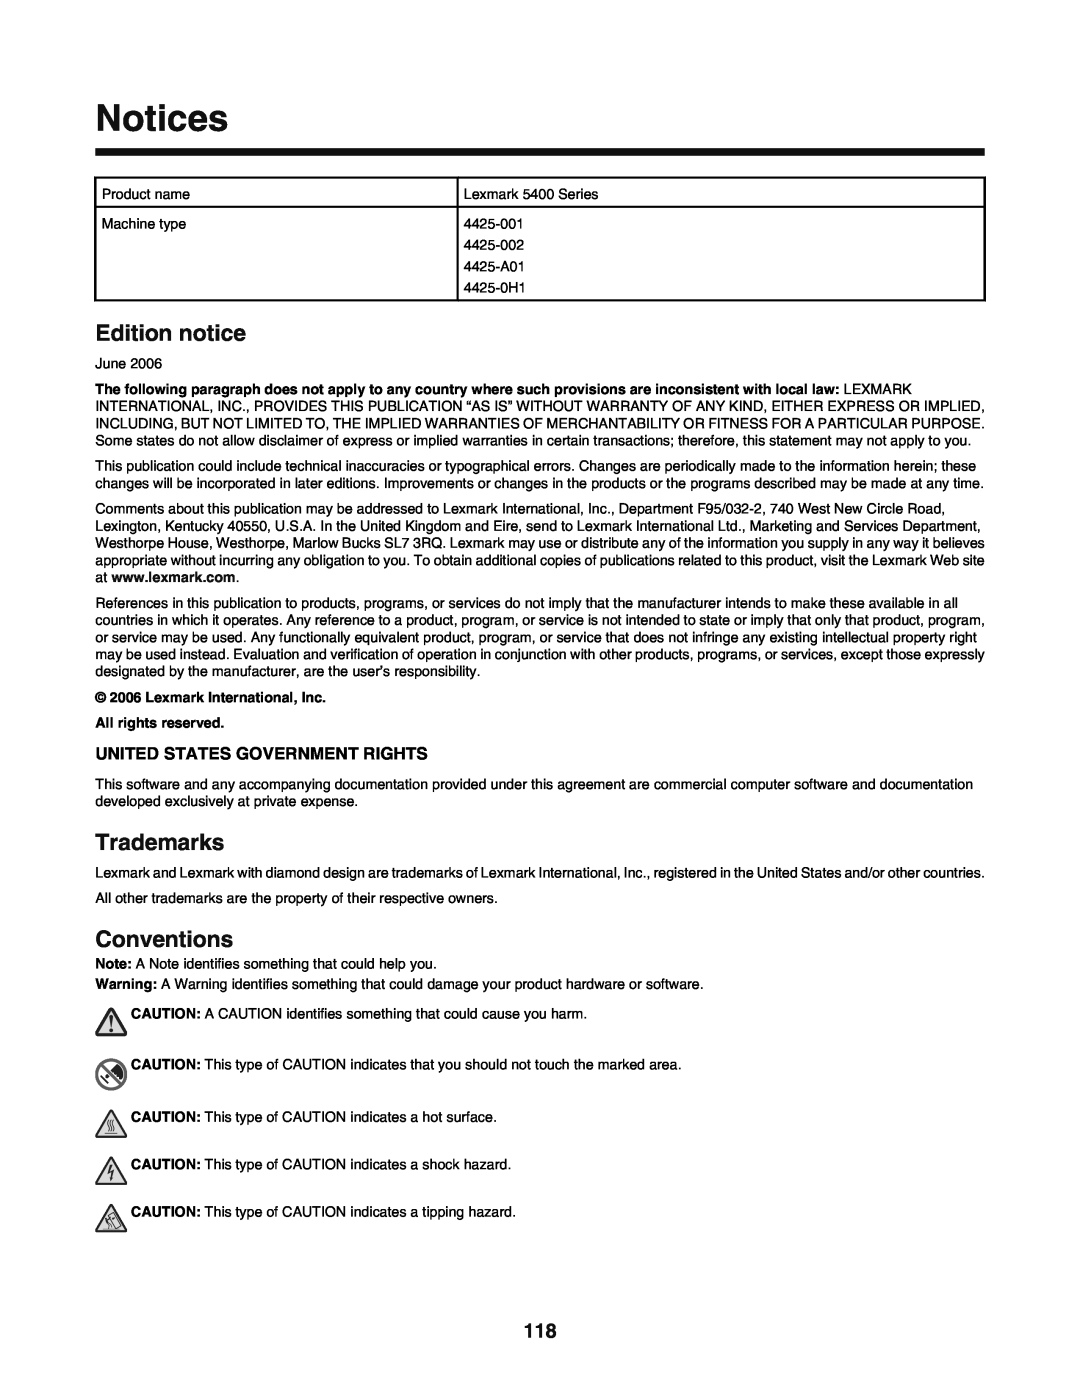 Lexmark 5400 manual Notices, Edition notice, Trademarks, Conventions, United States Government Rights 